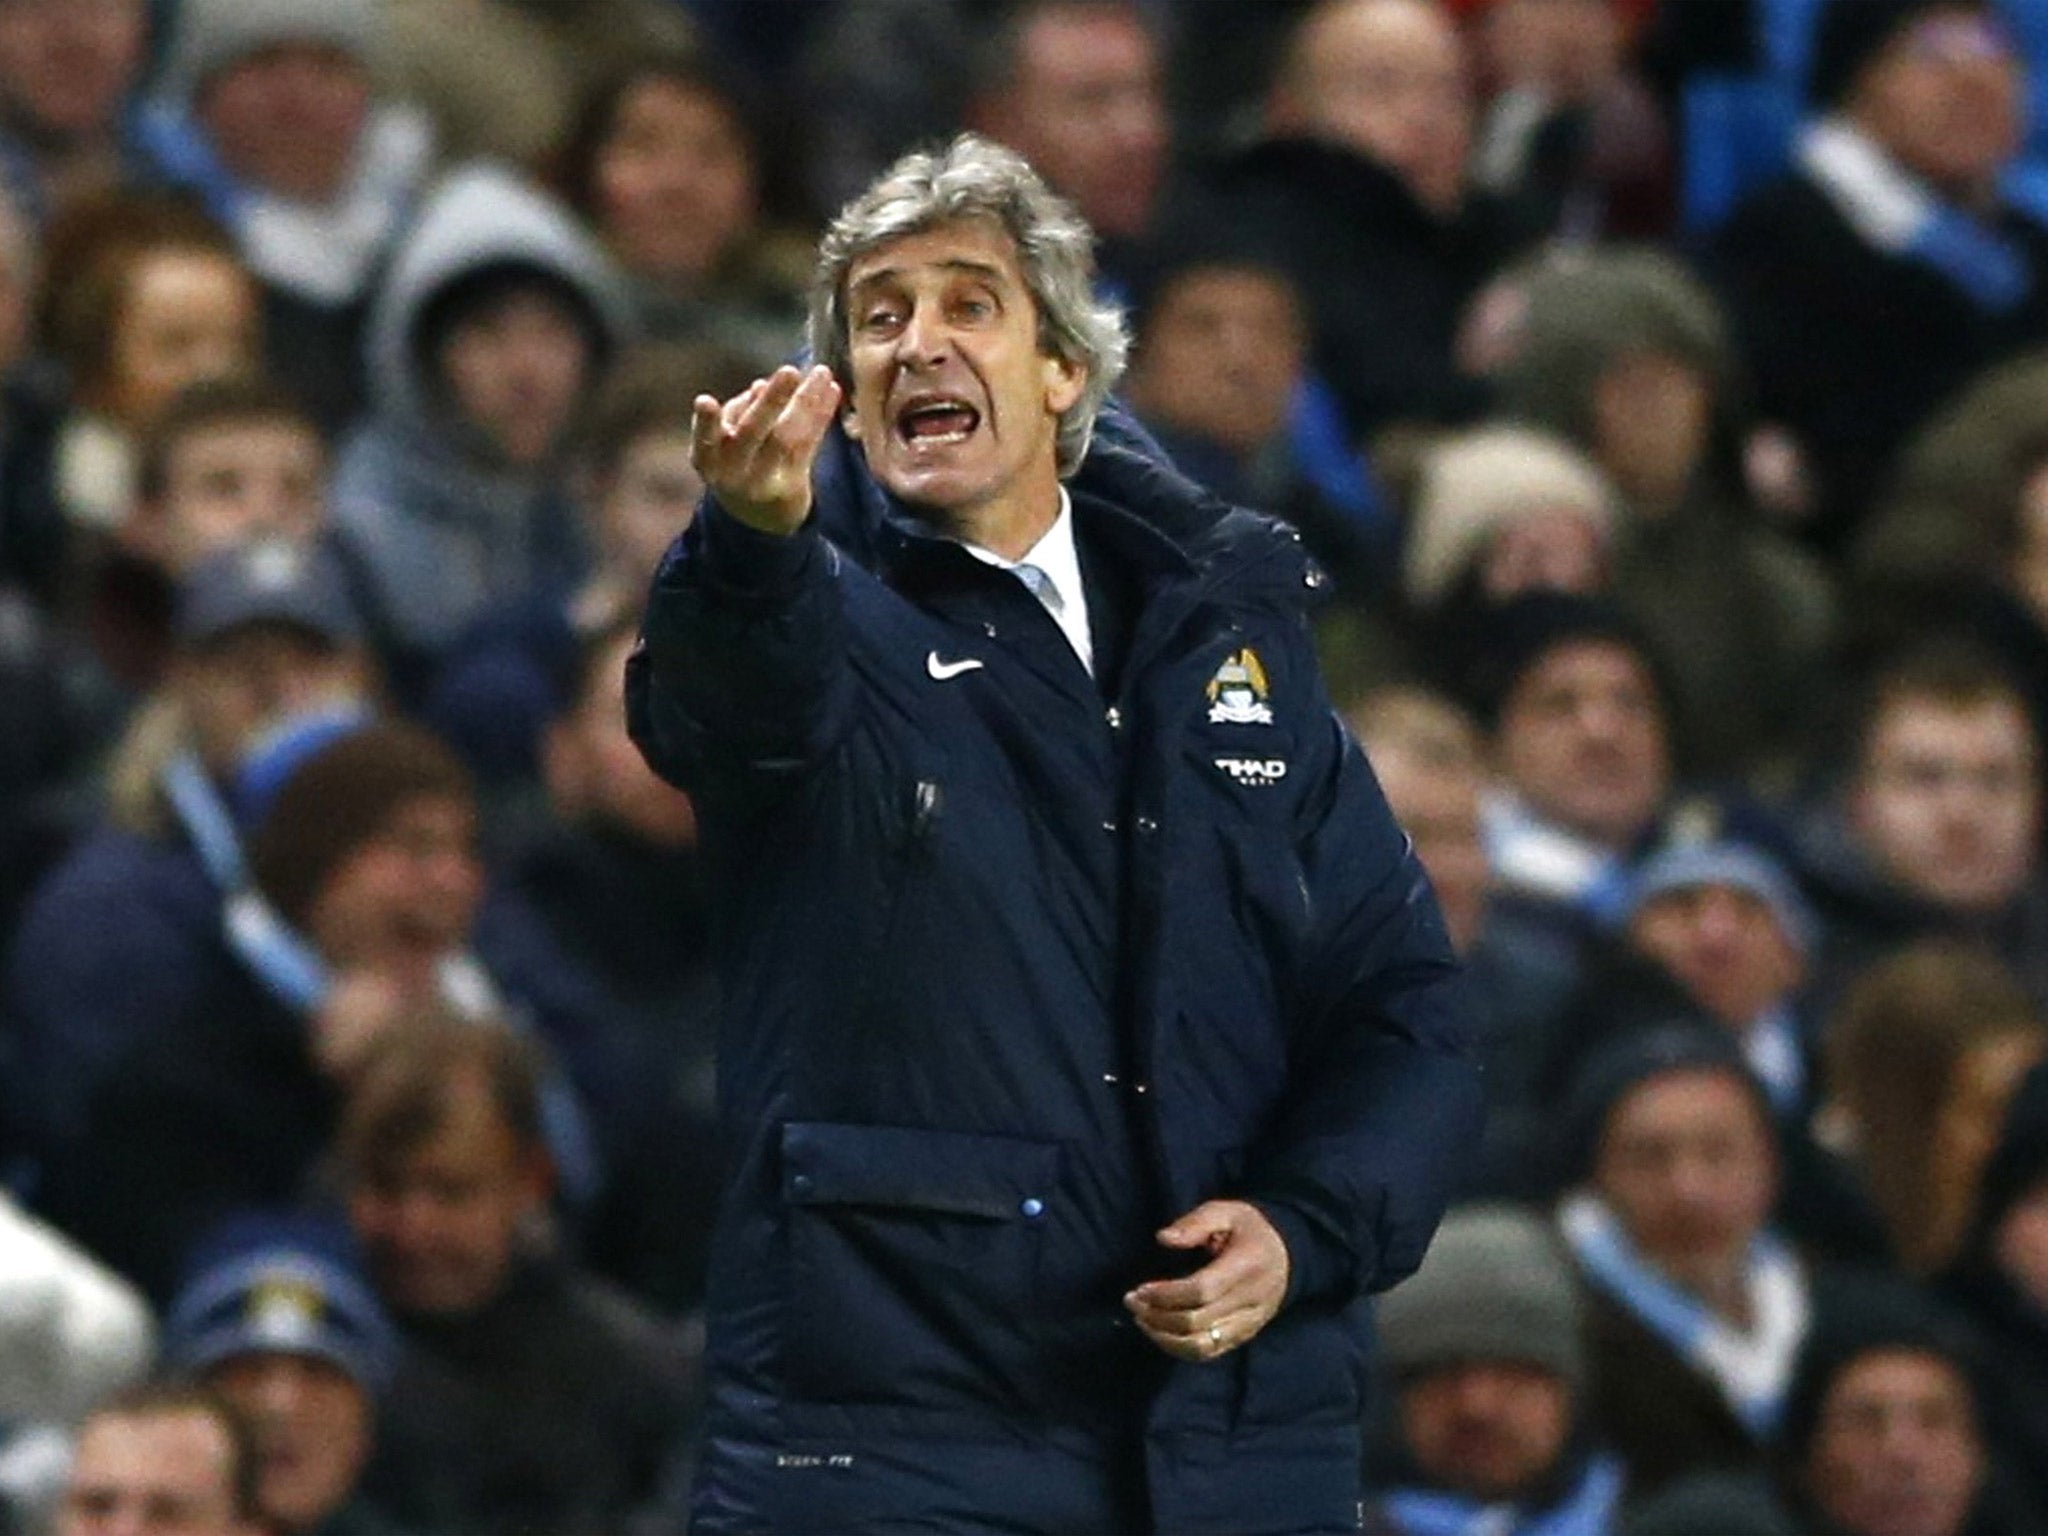 ‘We will see who does it better,’ says Manuel Pellegrini of Chelsea’s title challenge